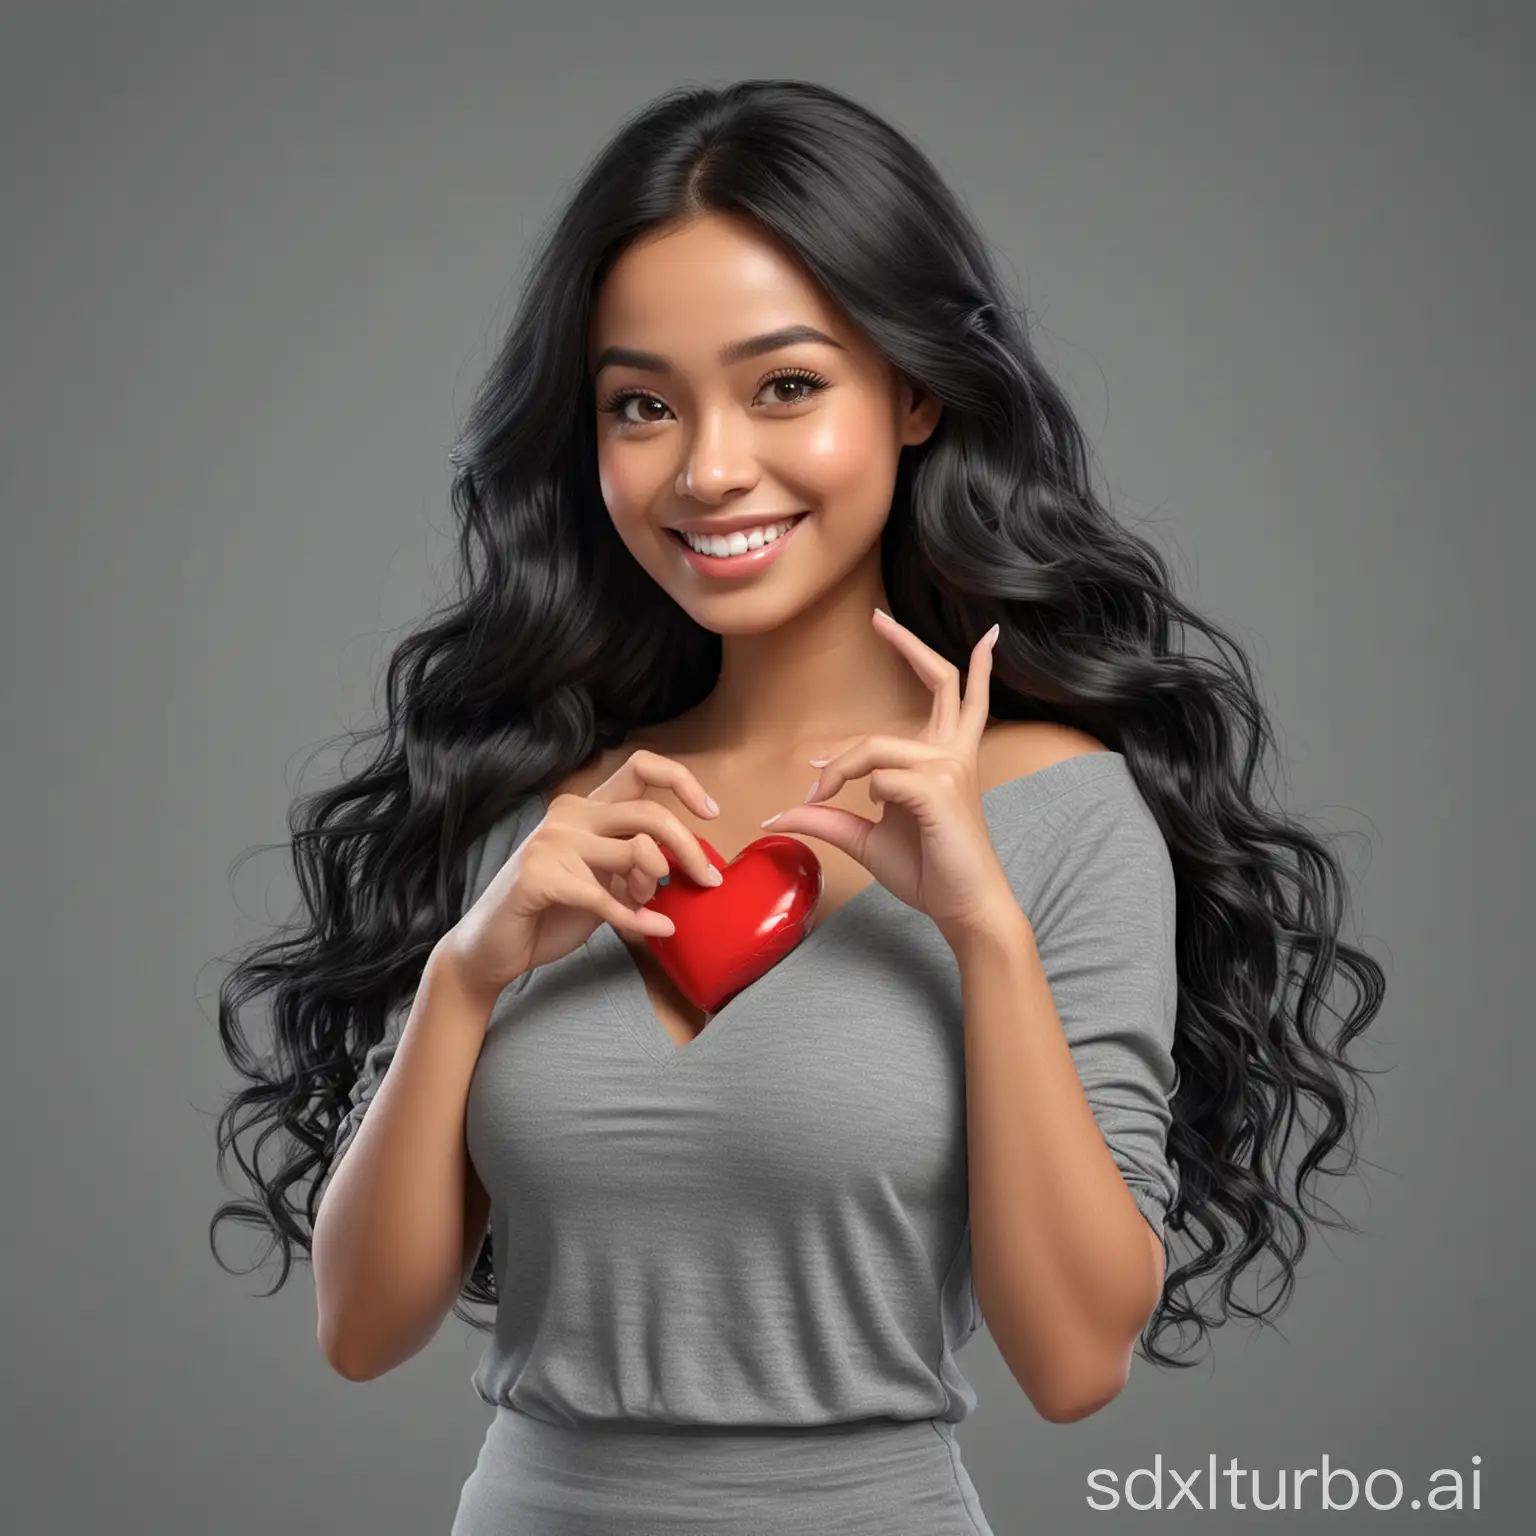 Hyperrealistic 3D Cartoon style character with big head. A beautiful 30 year old Indonesian woman, ideal body, long black wavy hair, smiling at the camera with her fingers forming a heart shape. Full body on a gray background. Use soft photography lighting. Hair lighting, top lighting, side lighting, high quality photos, UHD, 16K